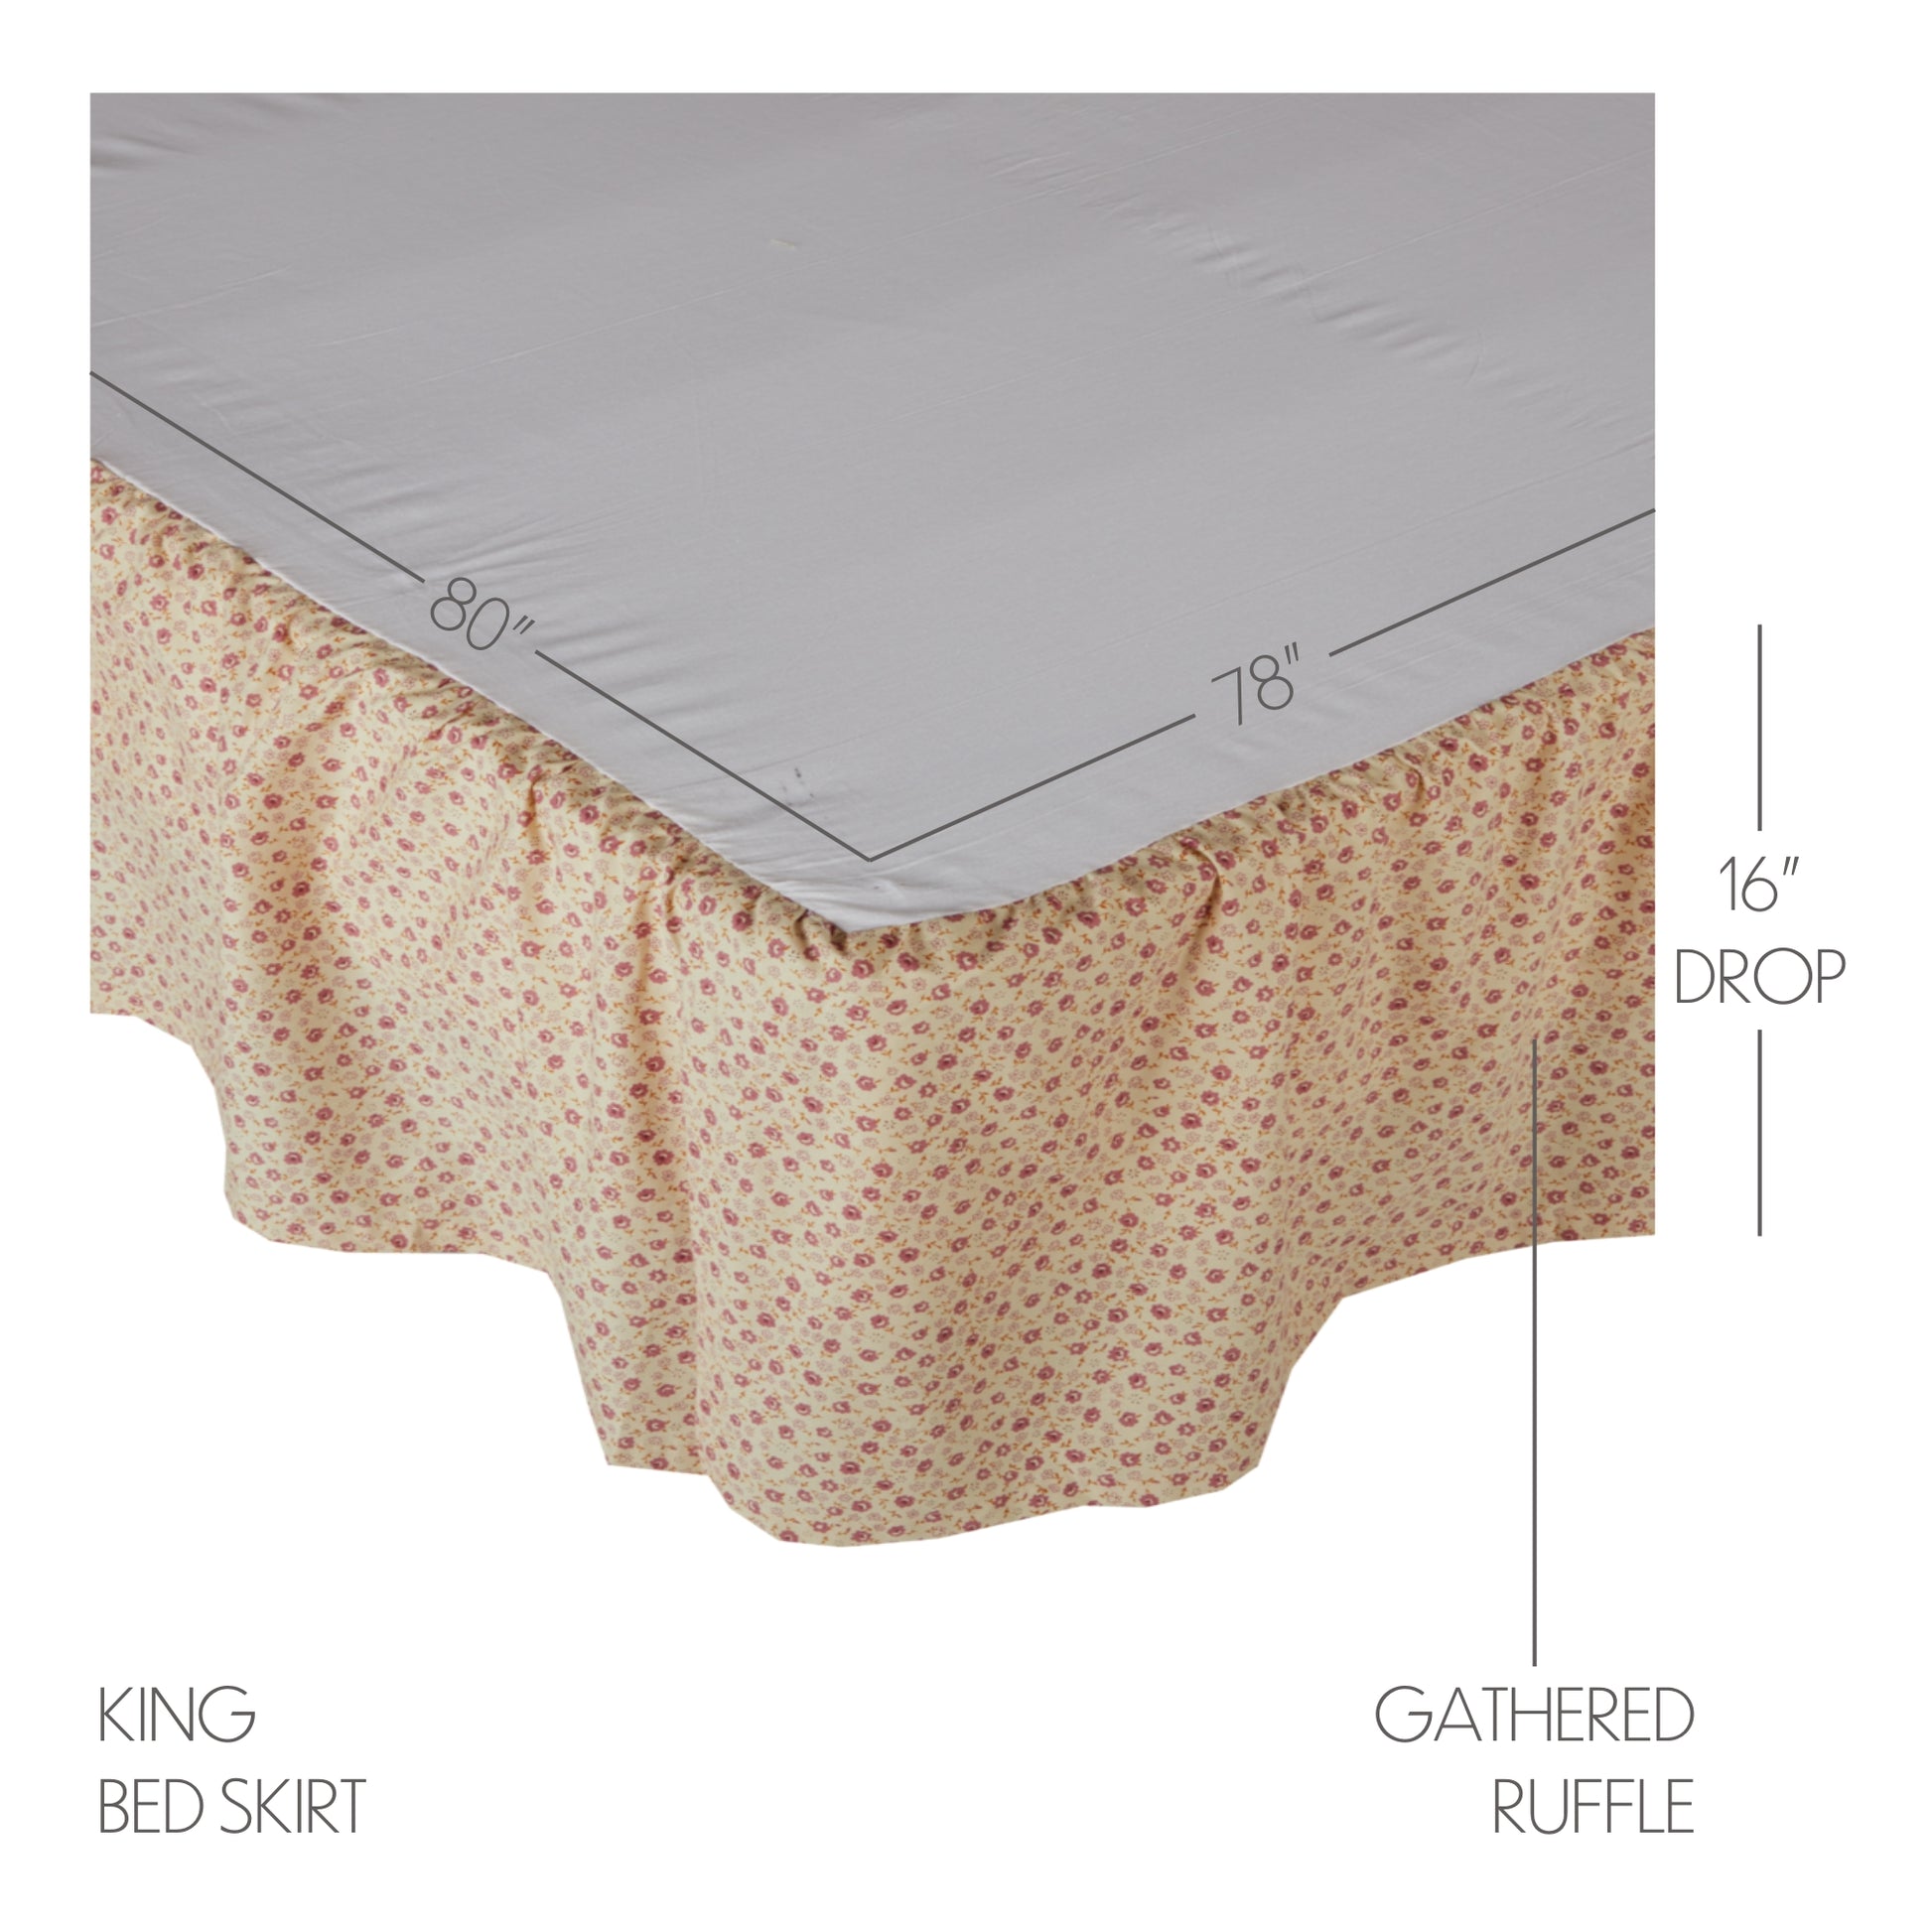 70076-Camilia-King-Bed-Skirt-78x80x16-image-3